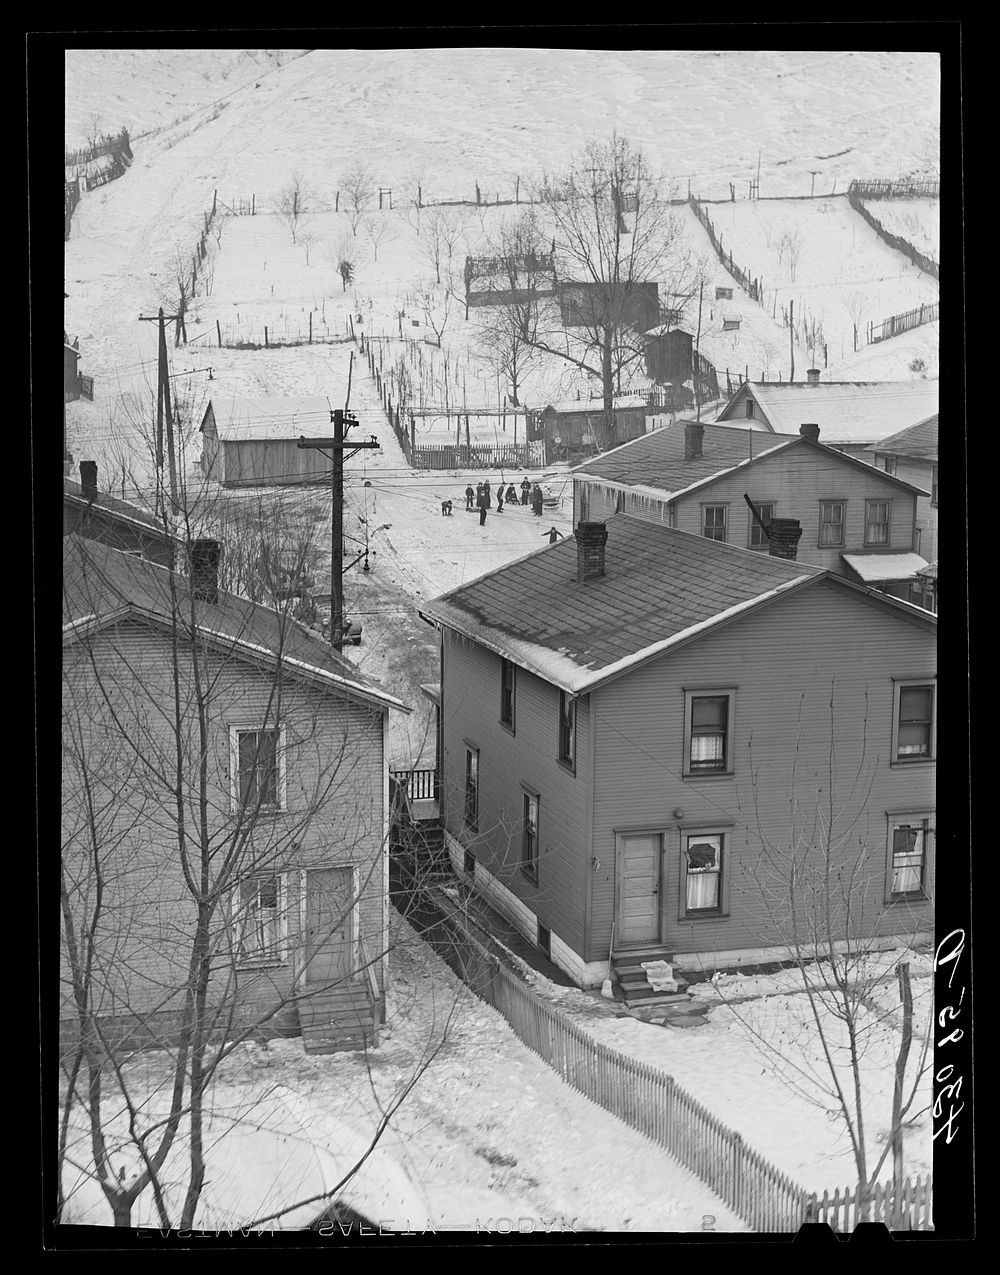 Houses in Aliquippa, Pennsylvania. Sourced from the Library of Congress.